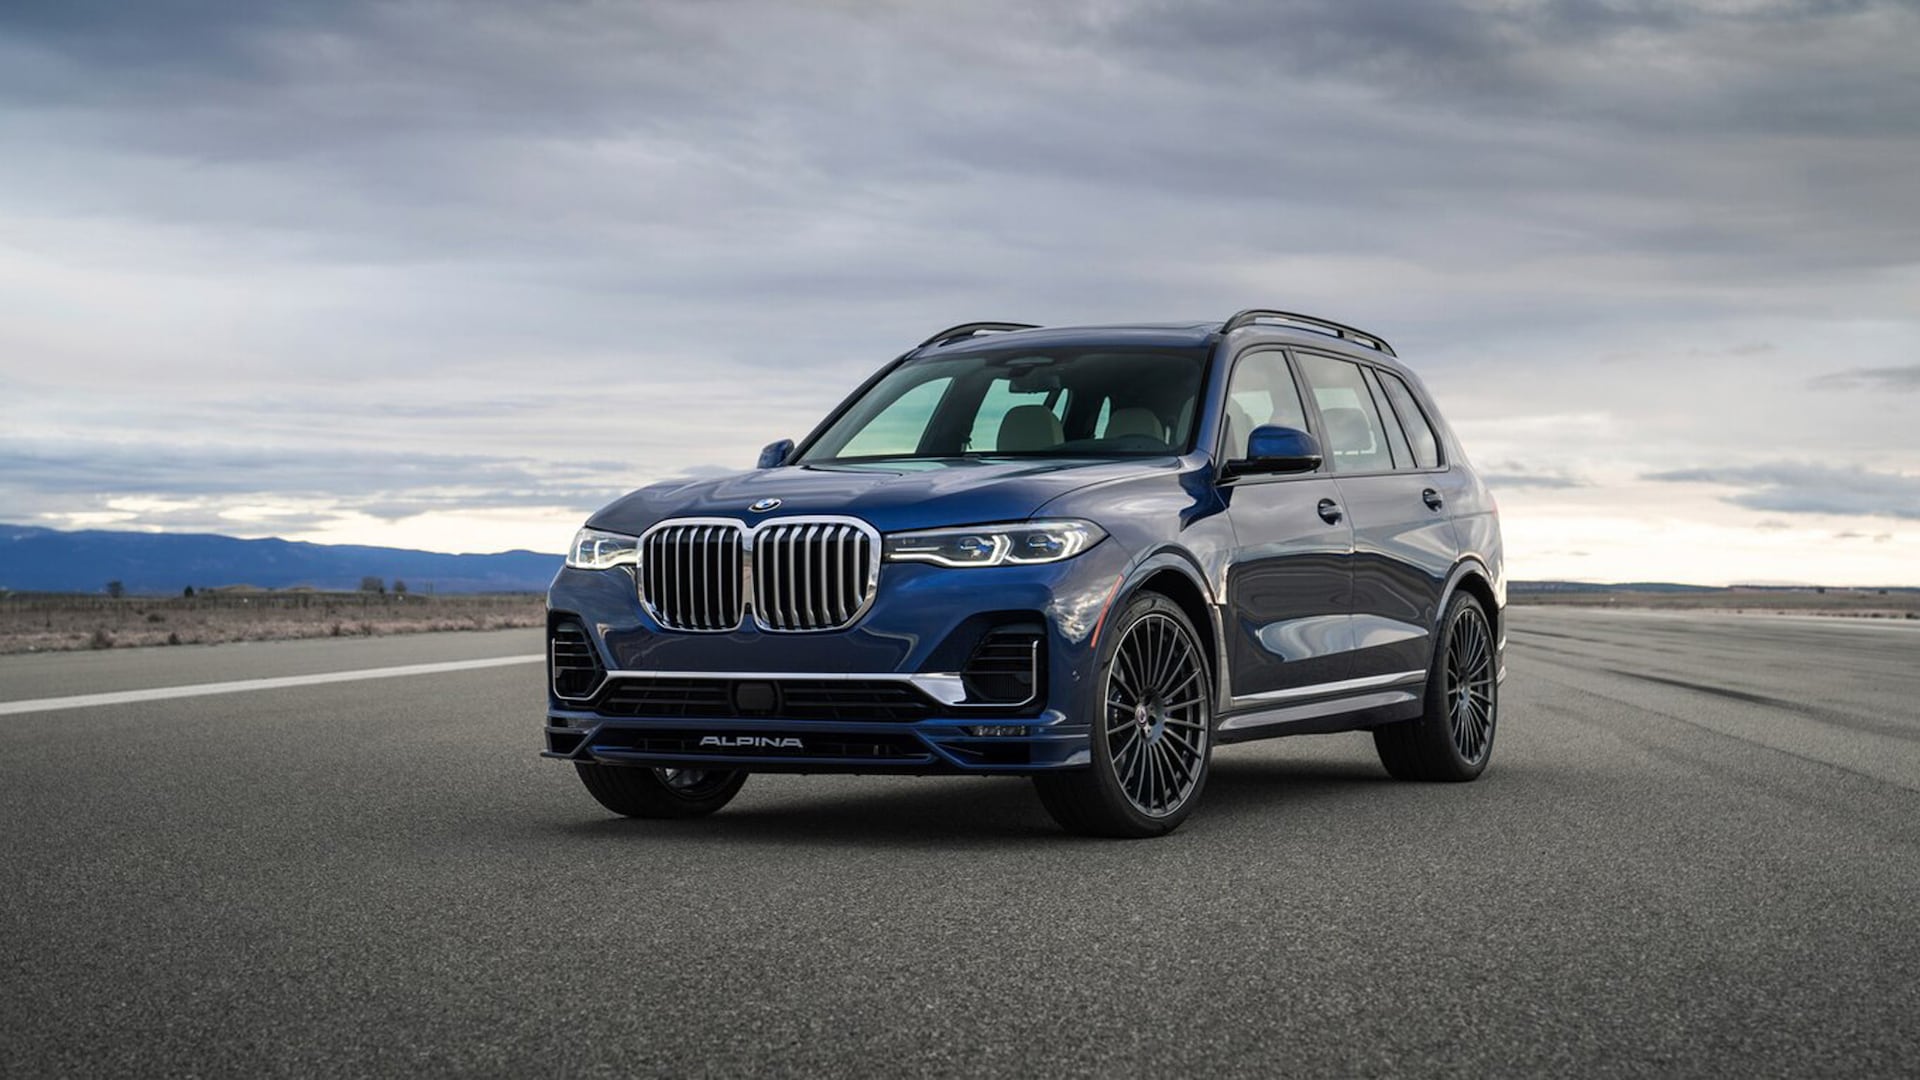 2022 BMW X7 Prices, Reviews, and Photos - MotorTrend